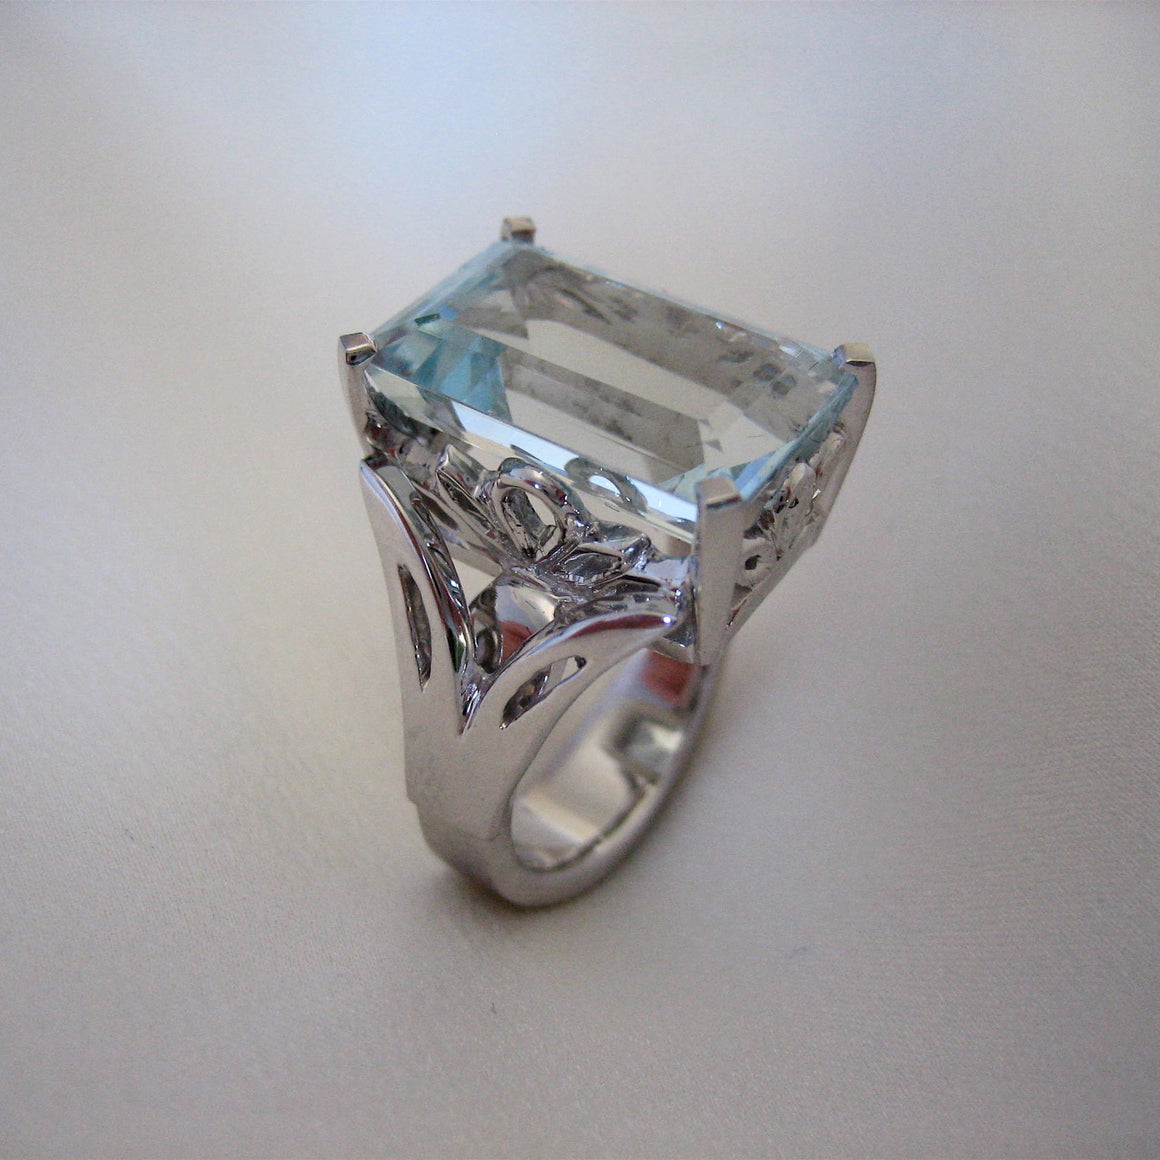 Rings - Handmade White Gold Ring Set With A Beautiful Aquamarine